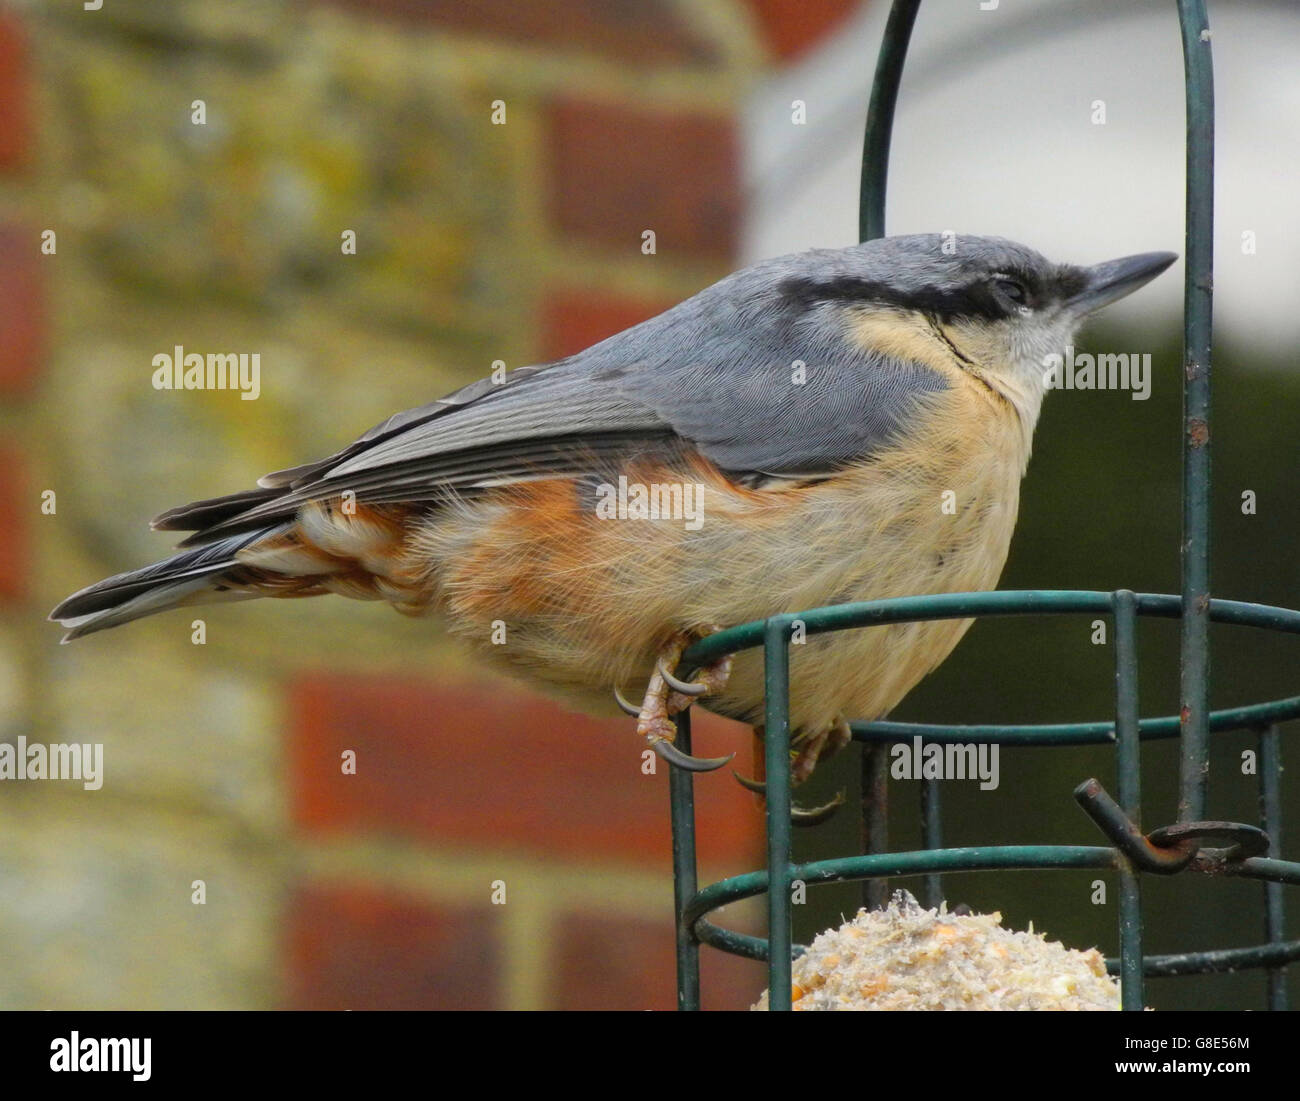 Petworth, Sussex, UK. 29th June, 2016. A healthy hatching record for one of our more exotic garden birds has kept them on the Green List for birds whose population is not endangered. This tiny Nuthatch (Sitta europaea) chick was making one of its first visits to a garden birdtable near Petworth in Sussex. Credit:  David Cole/Alamy Live News Stock Photo